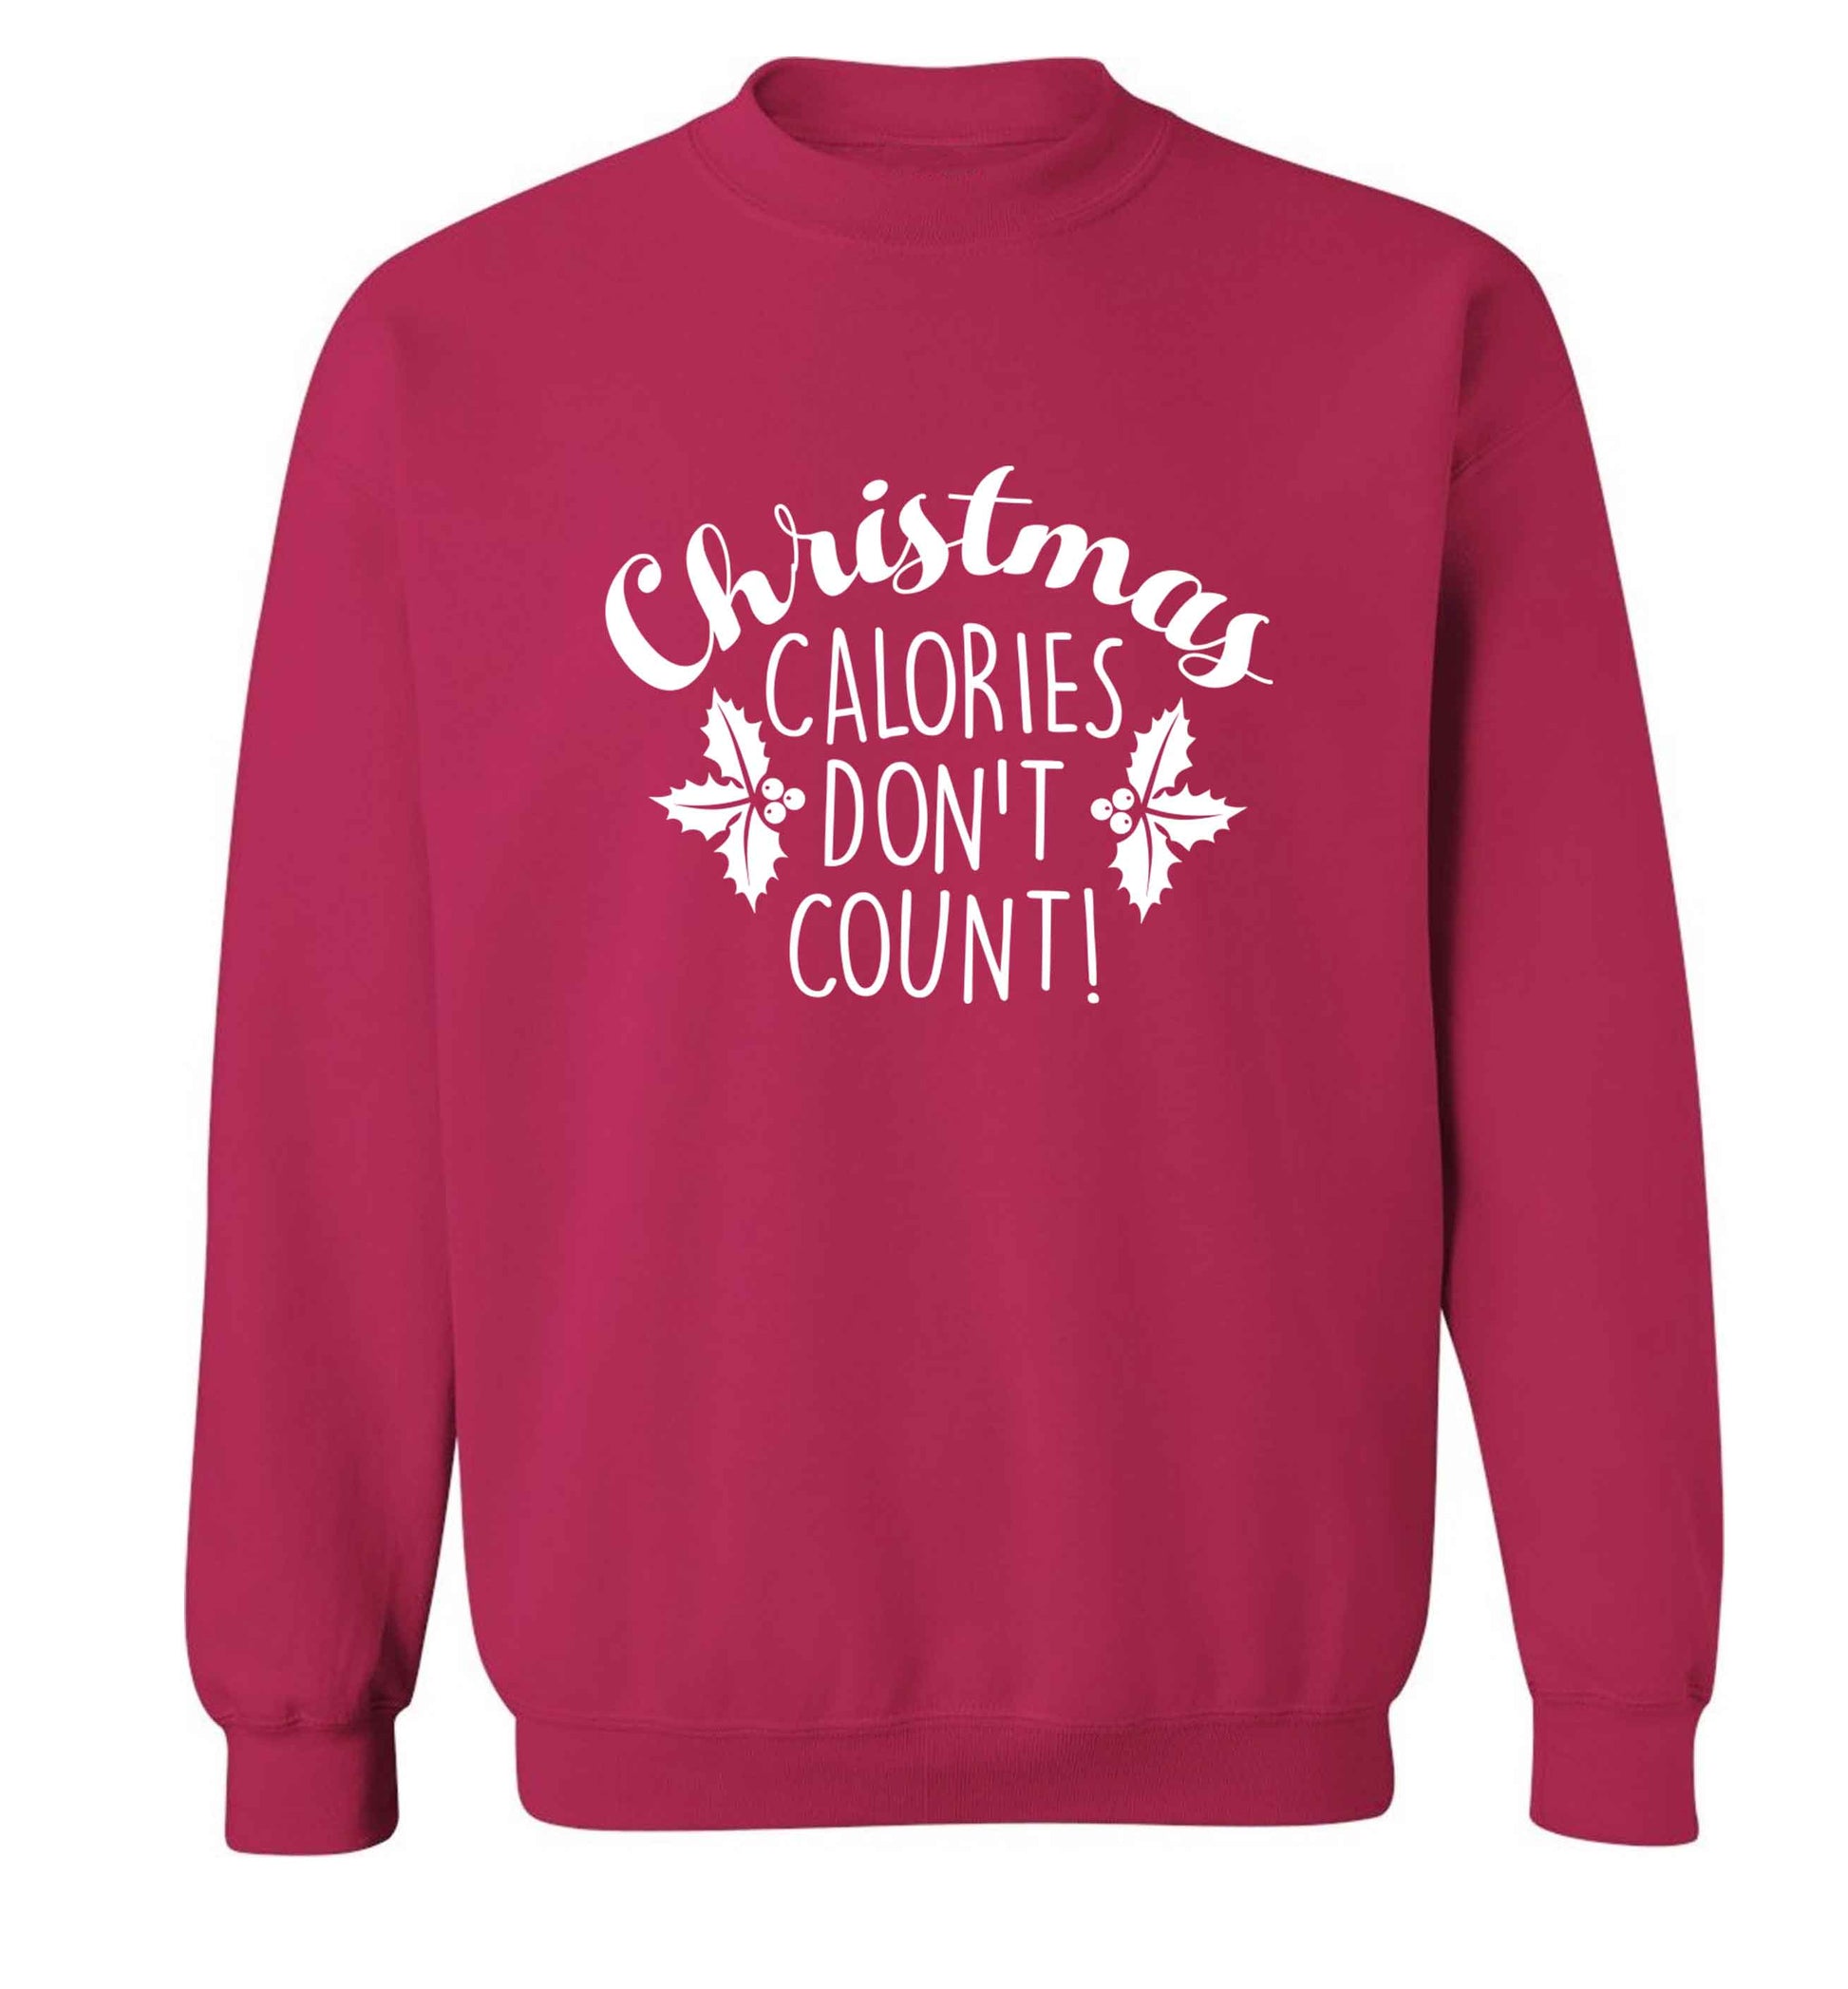 Christmas calories don't count adult's unisex pink sweater 2XL